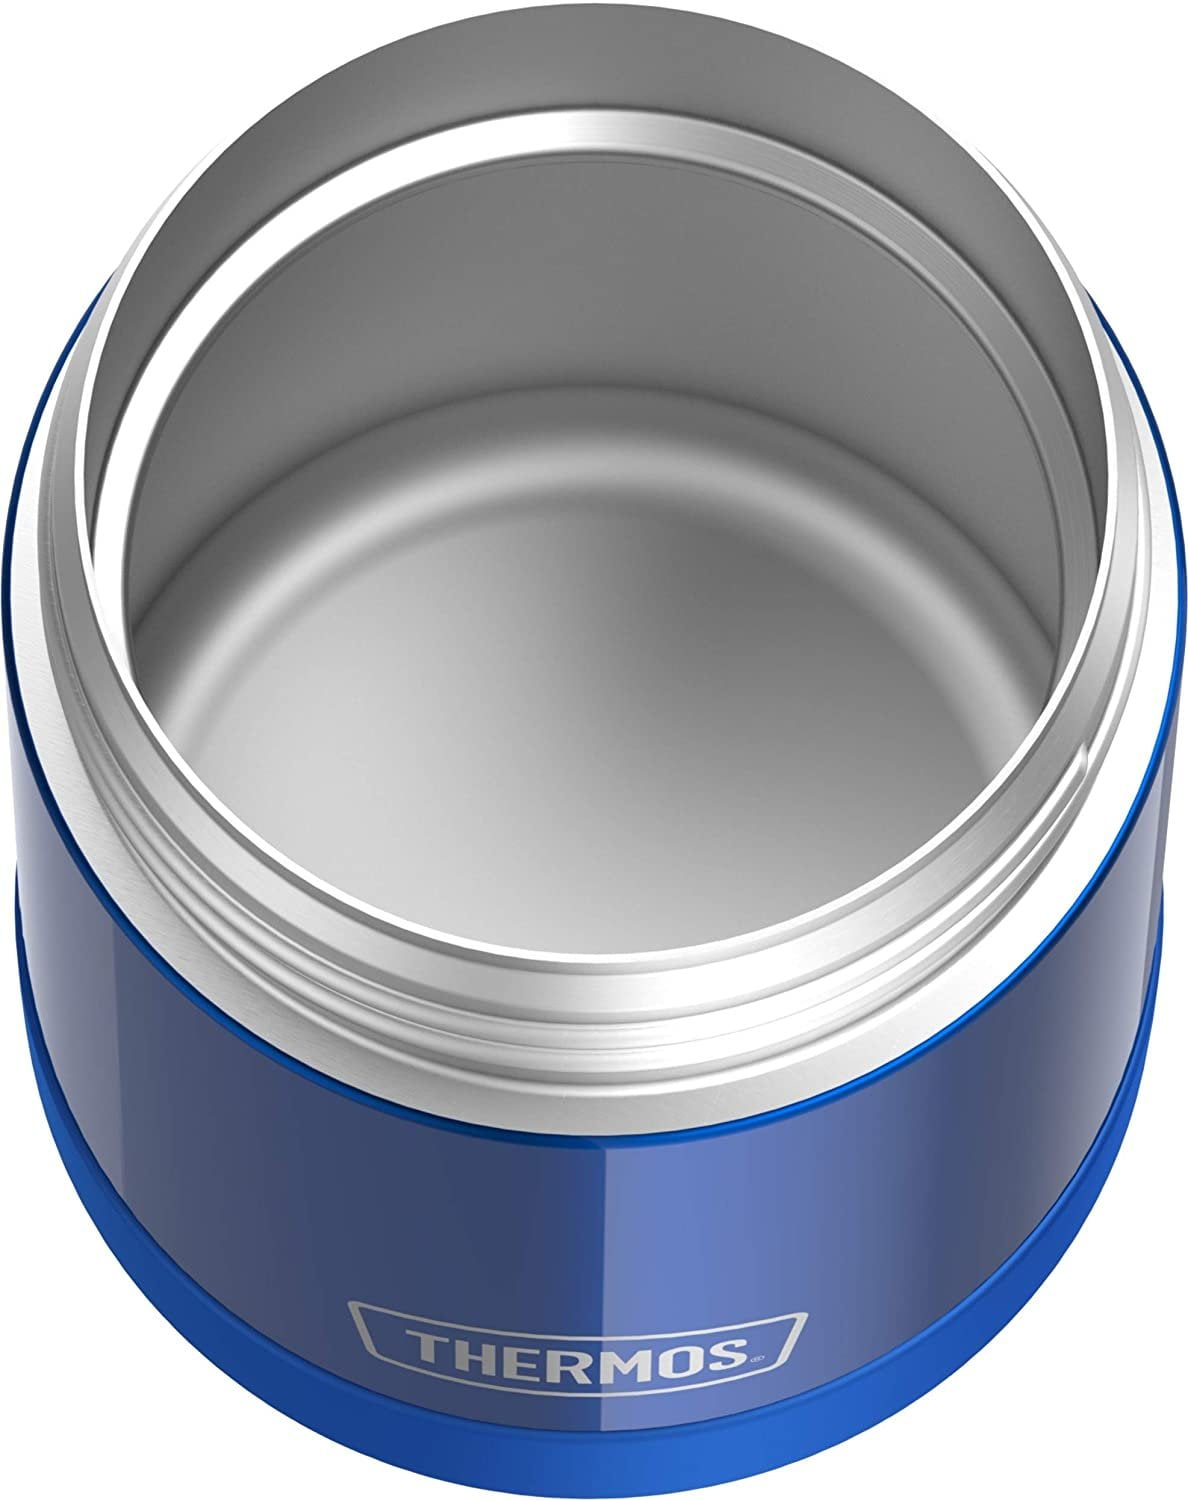 Thermos 10 oz Stainless Steel Funtainer Food Jar Solid Blue (1 ct)